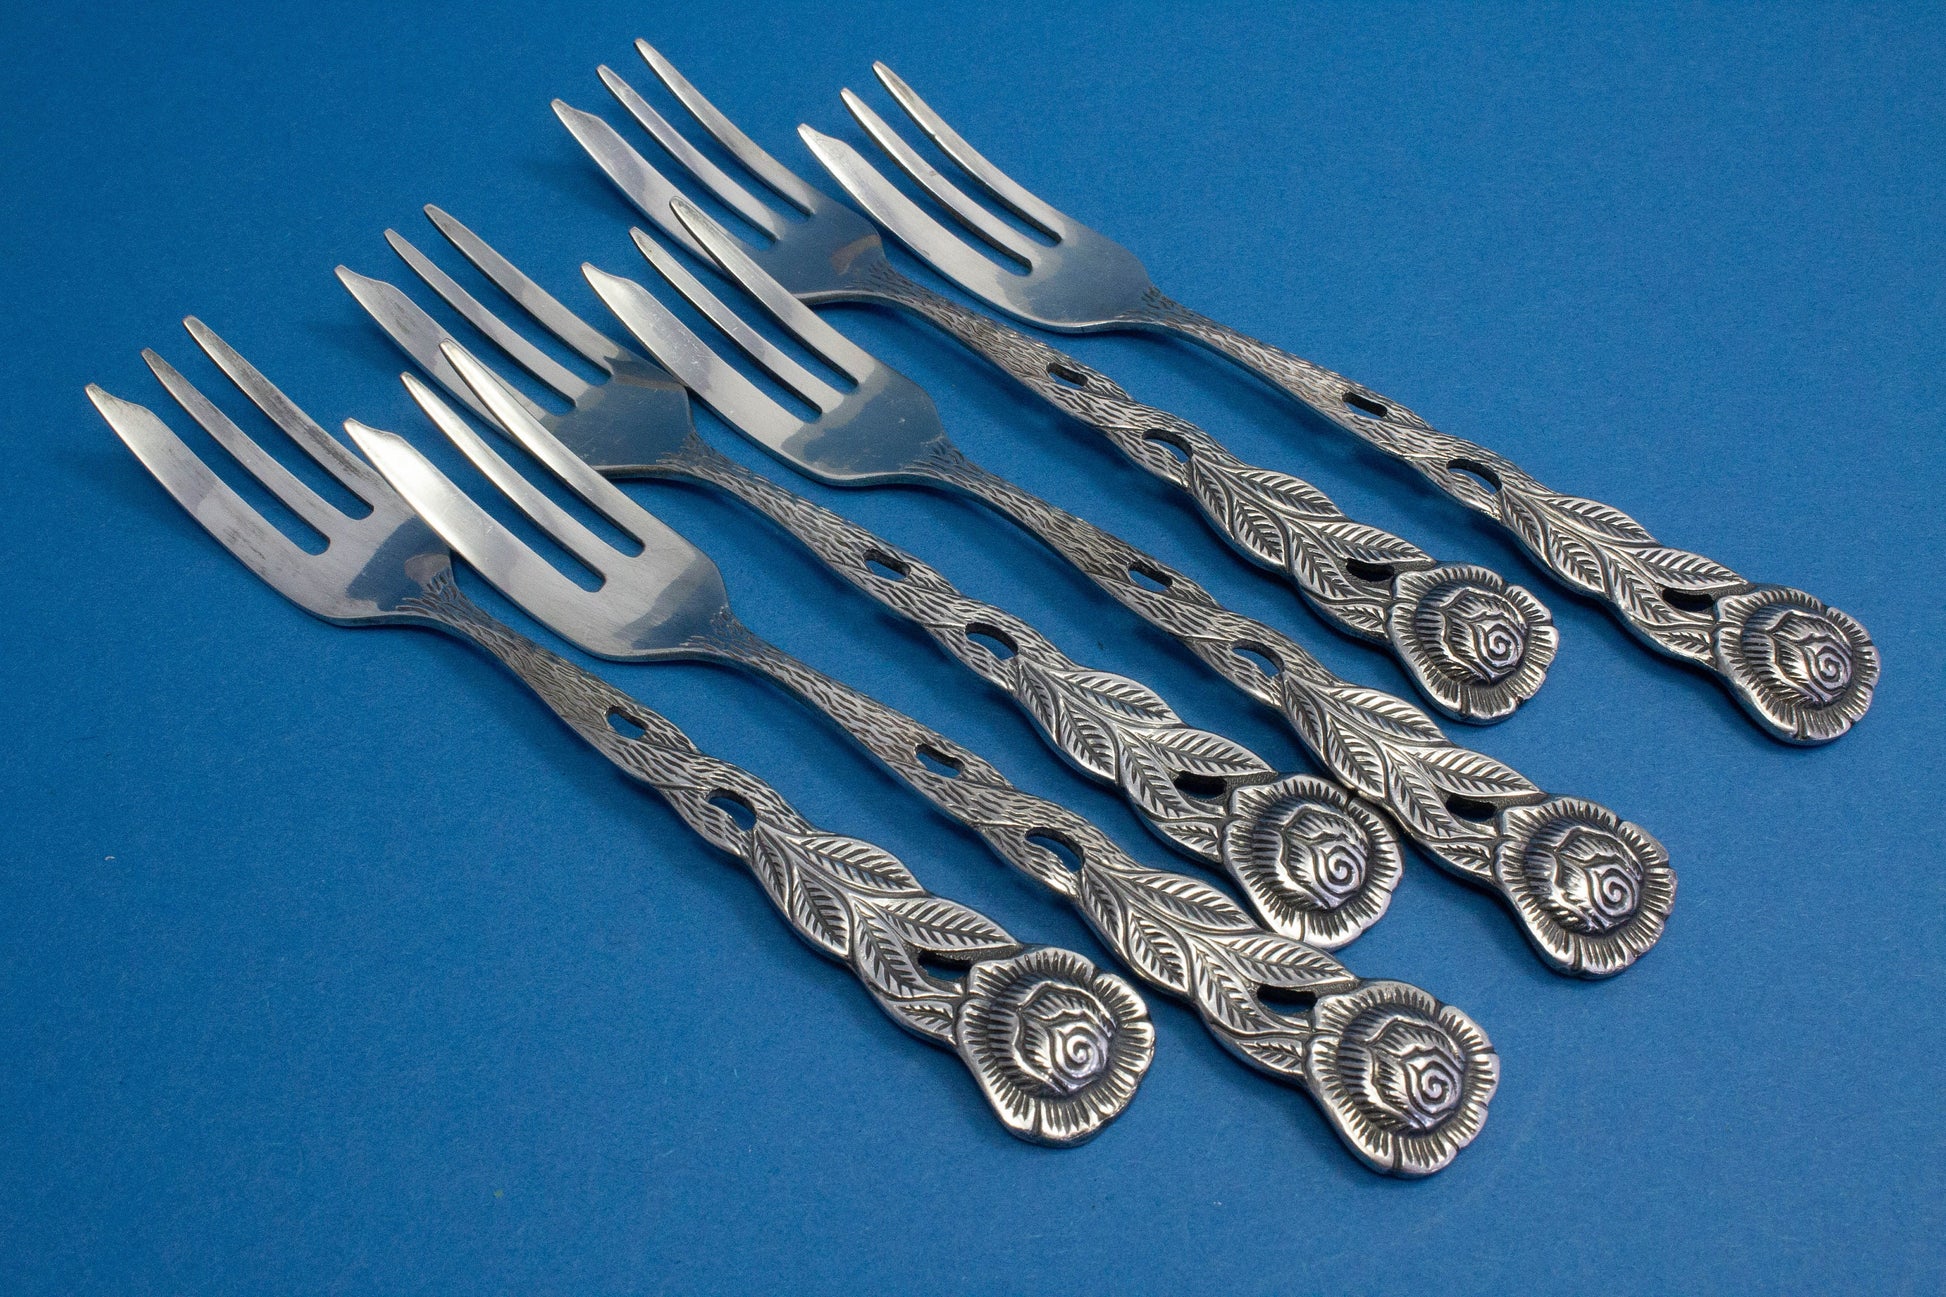 Cutlery set for 6 people, teaspoon and cake fork with roses